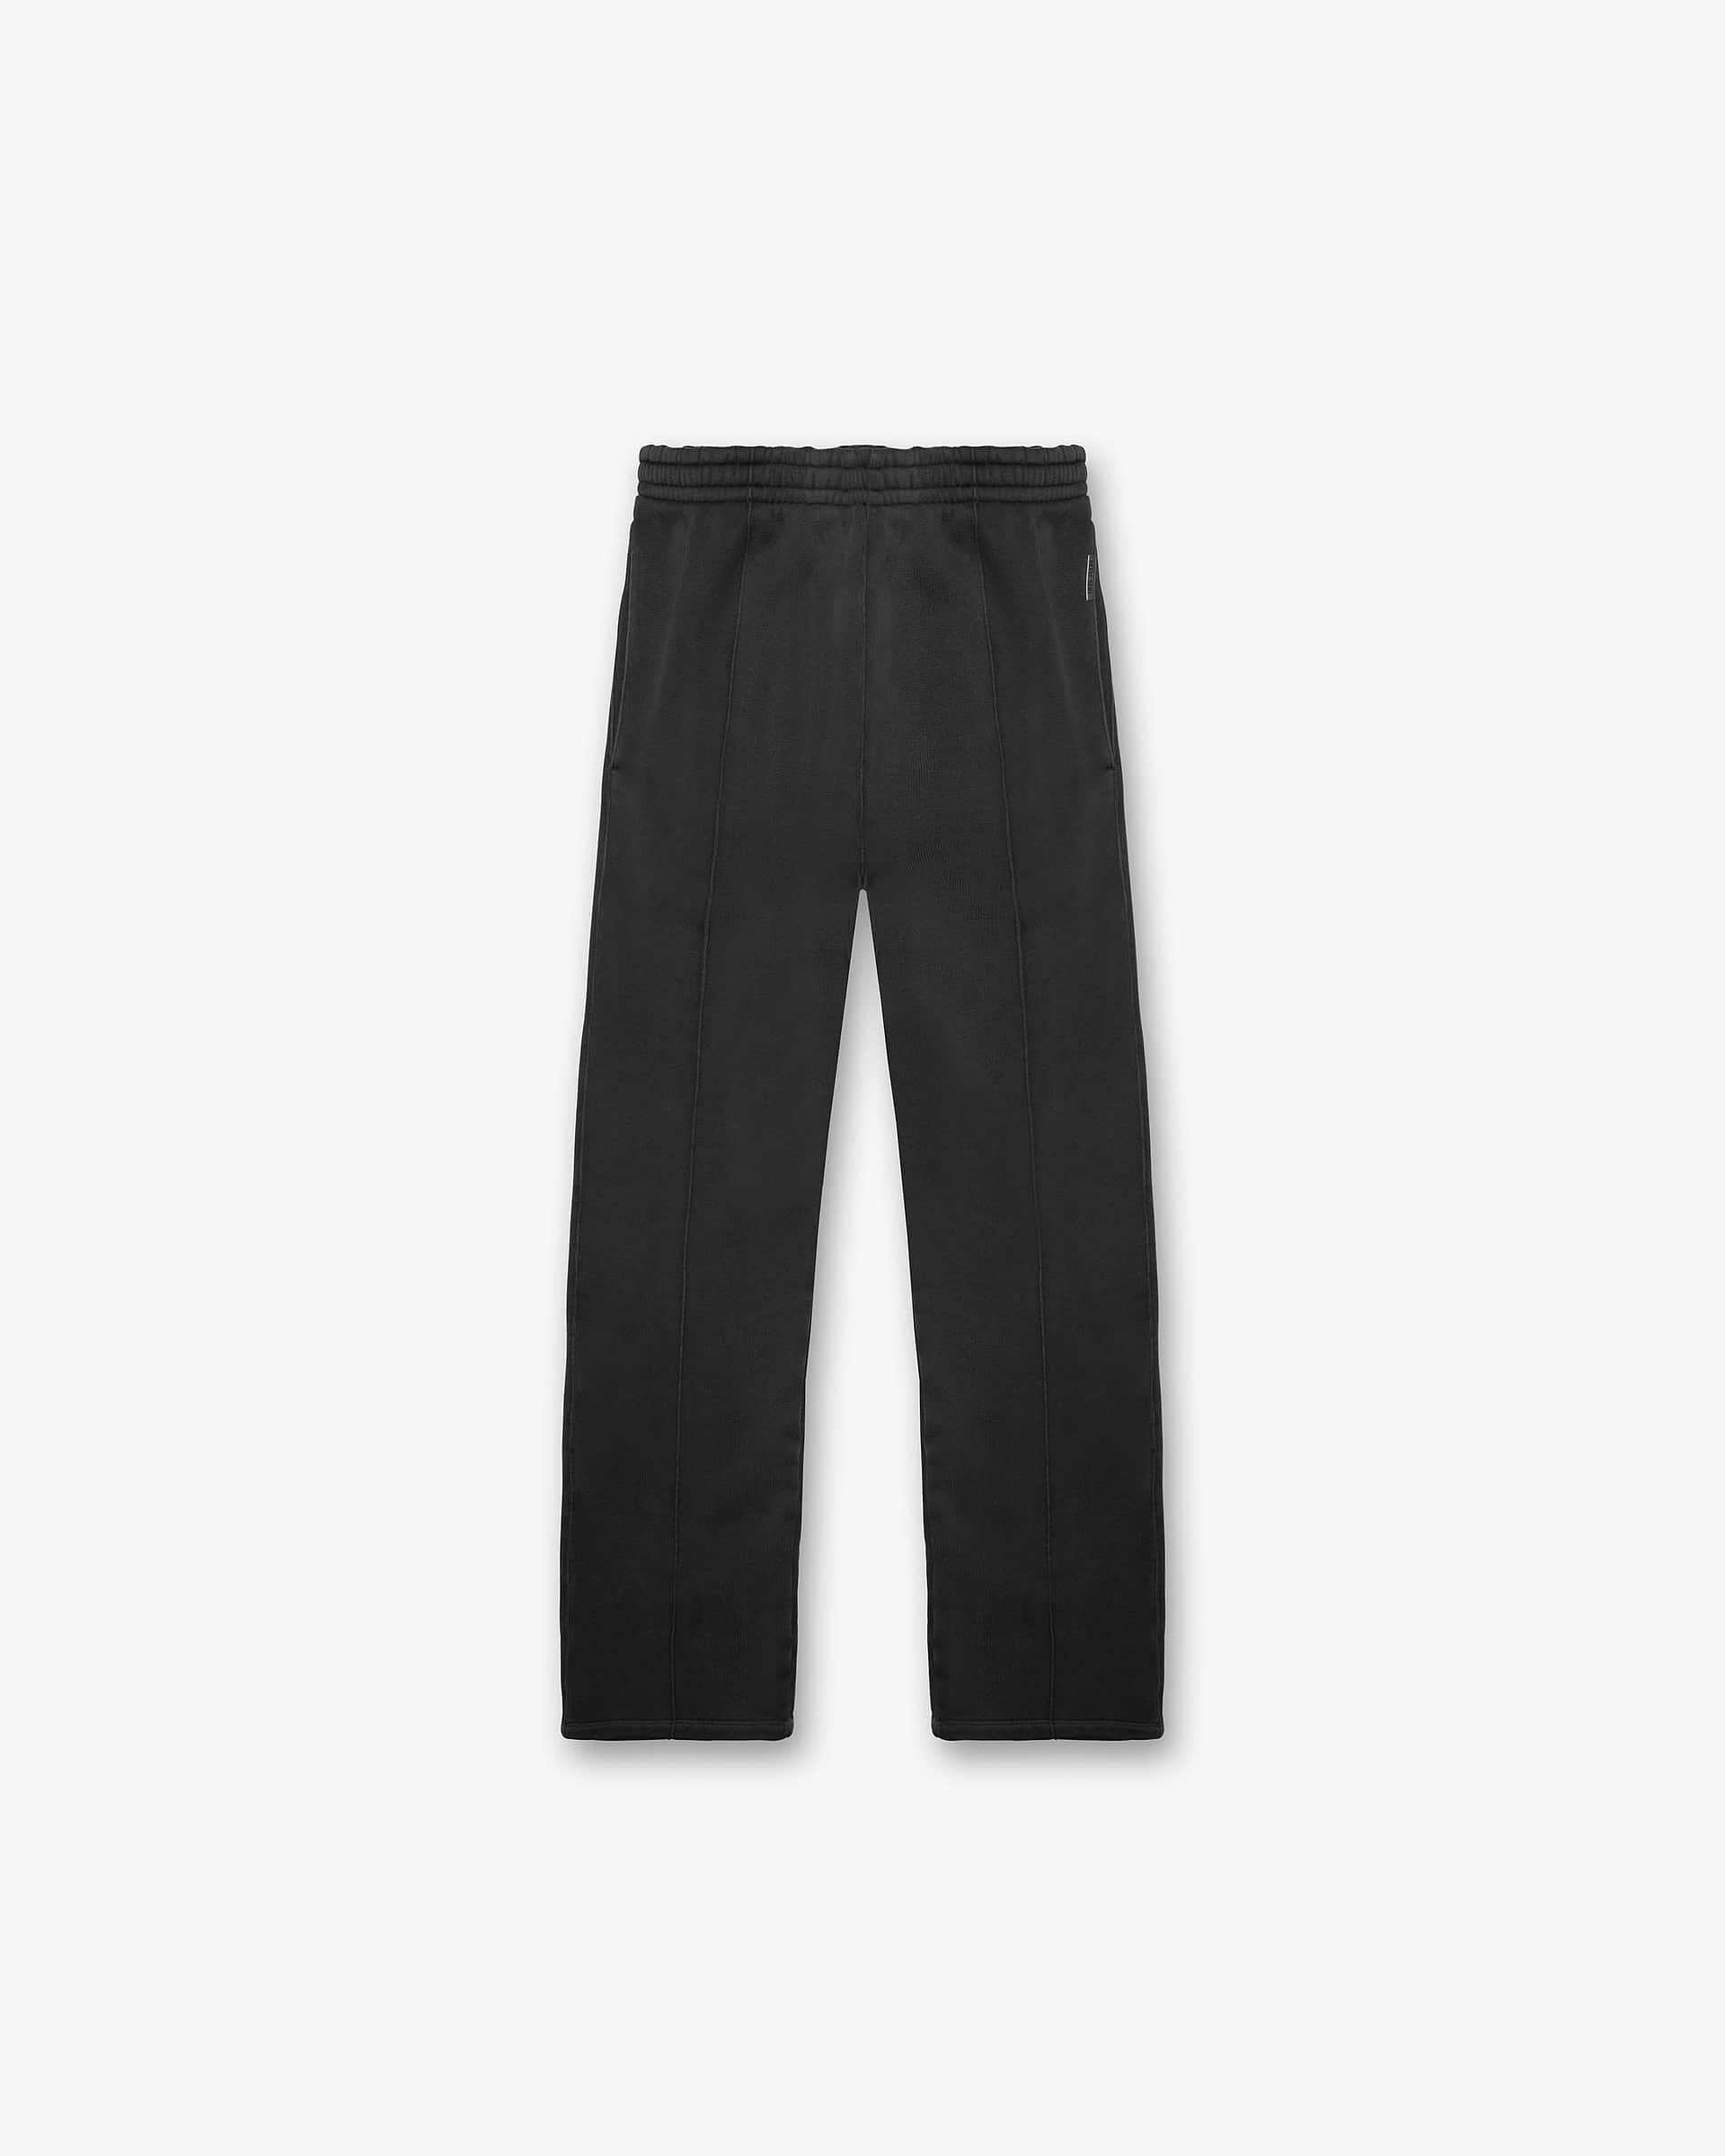 Heavyweight Initial Sweatpants - Stained Black